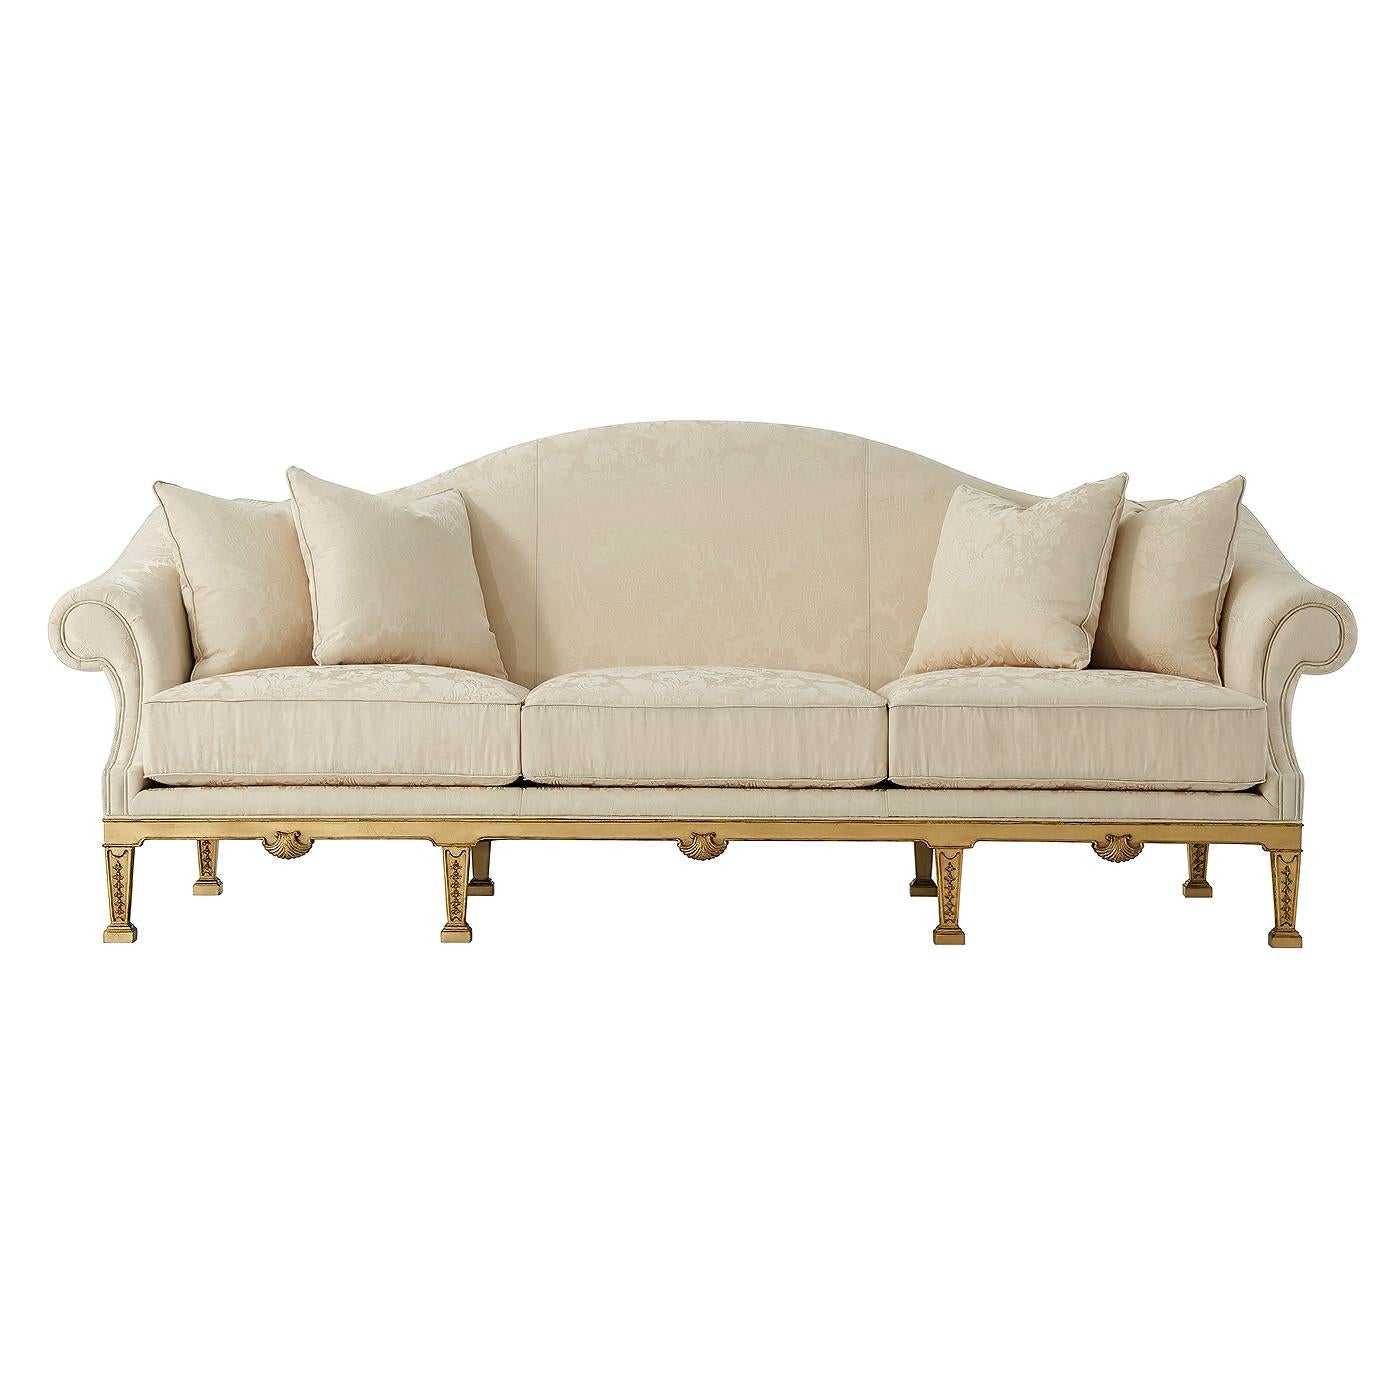 A George II style finely upholstered camel back sofa, the tightly upholstered back above three loose seat cushions with four throw pillows enclosed by out scrolled arms, on a hand-leafed gilt base carved in mahogany, with shell details and square